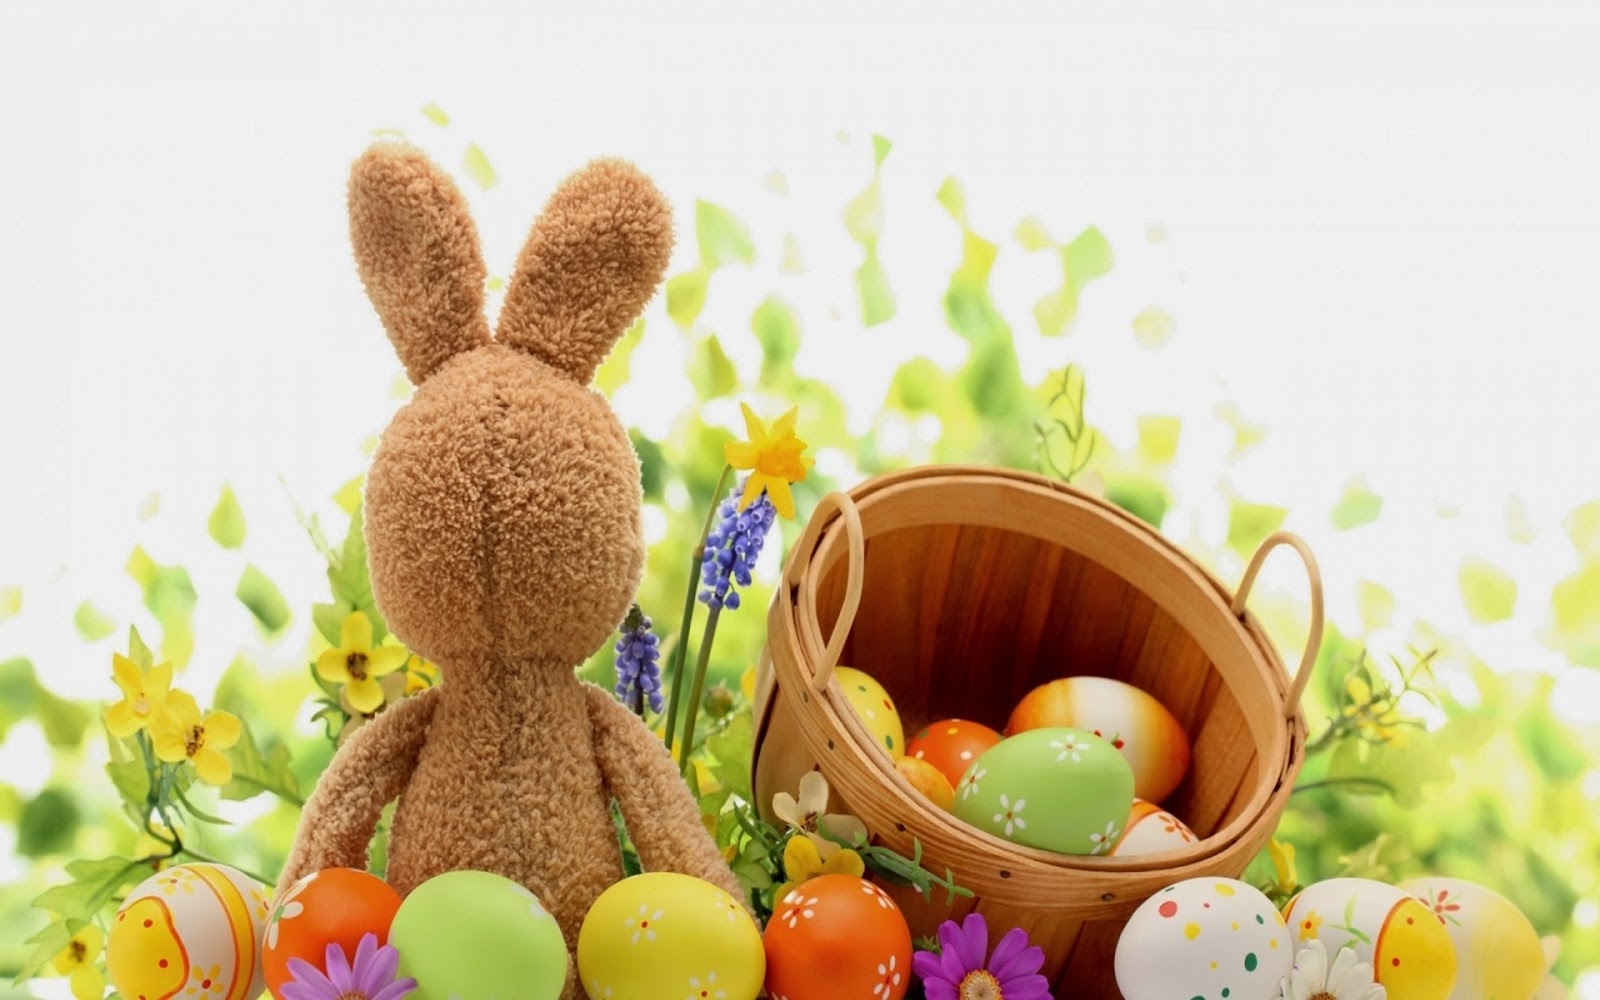 Colorful Wallpaper Easter Sunday Best Wishing Image